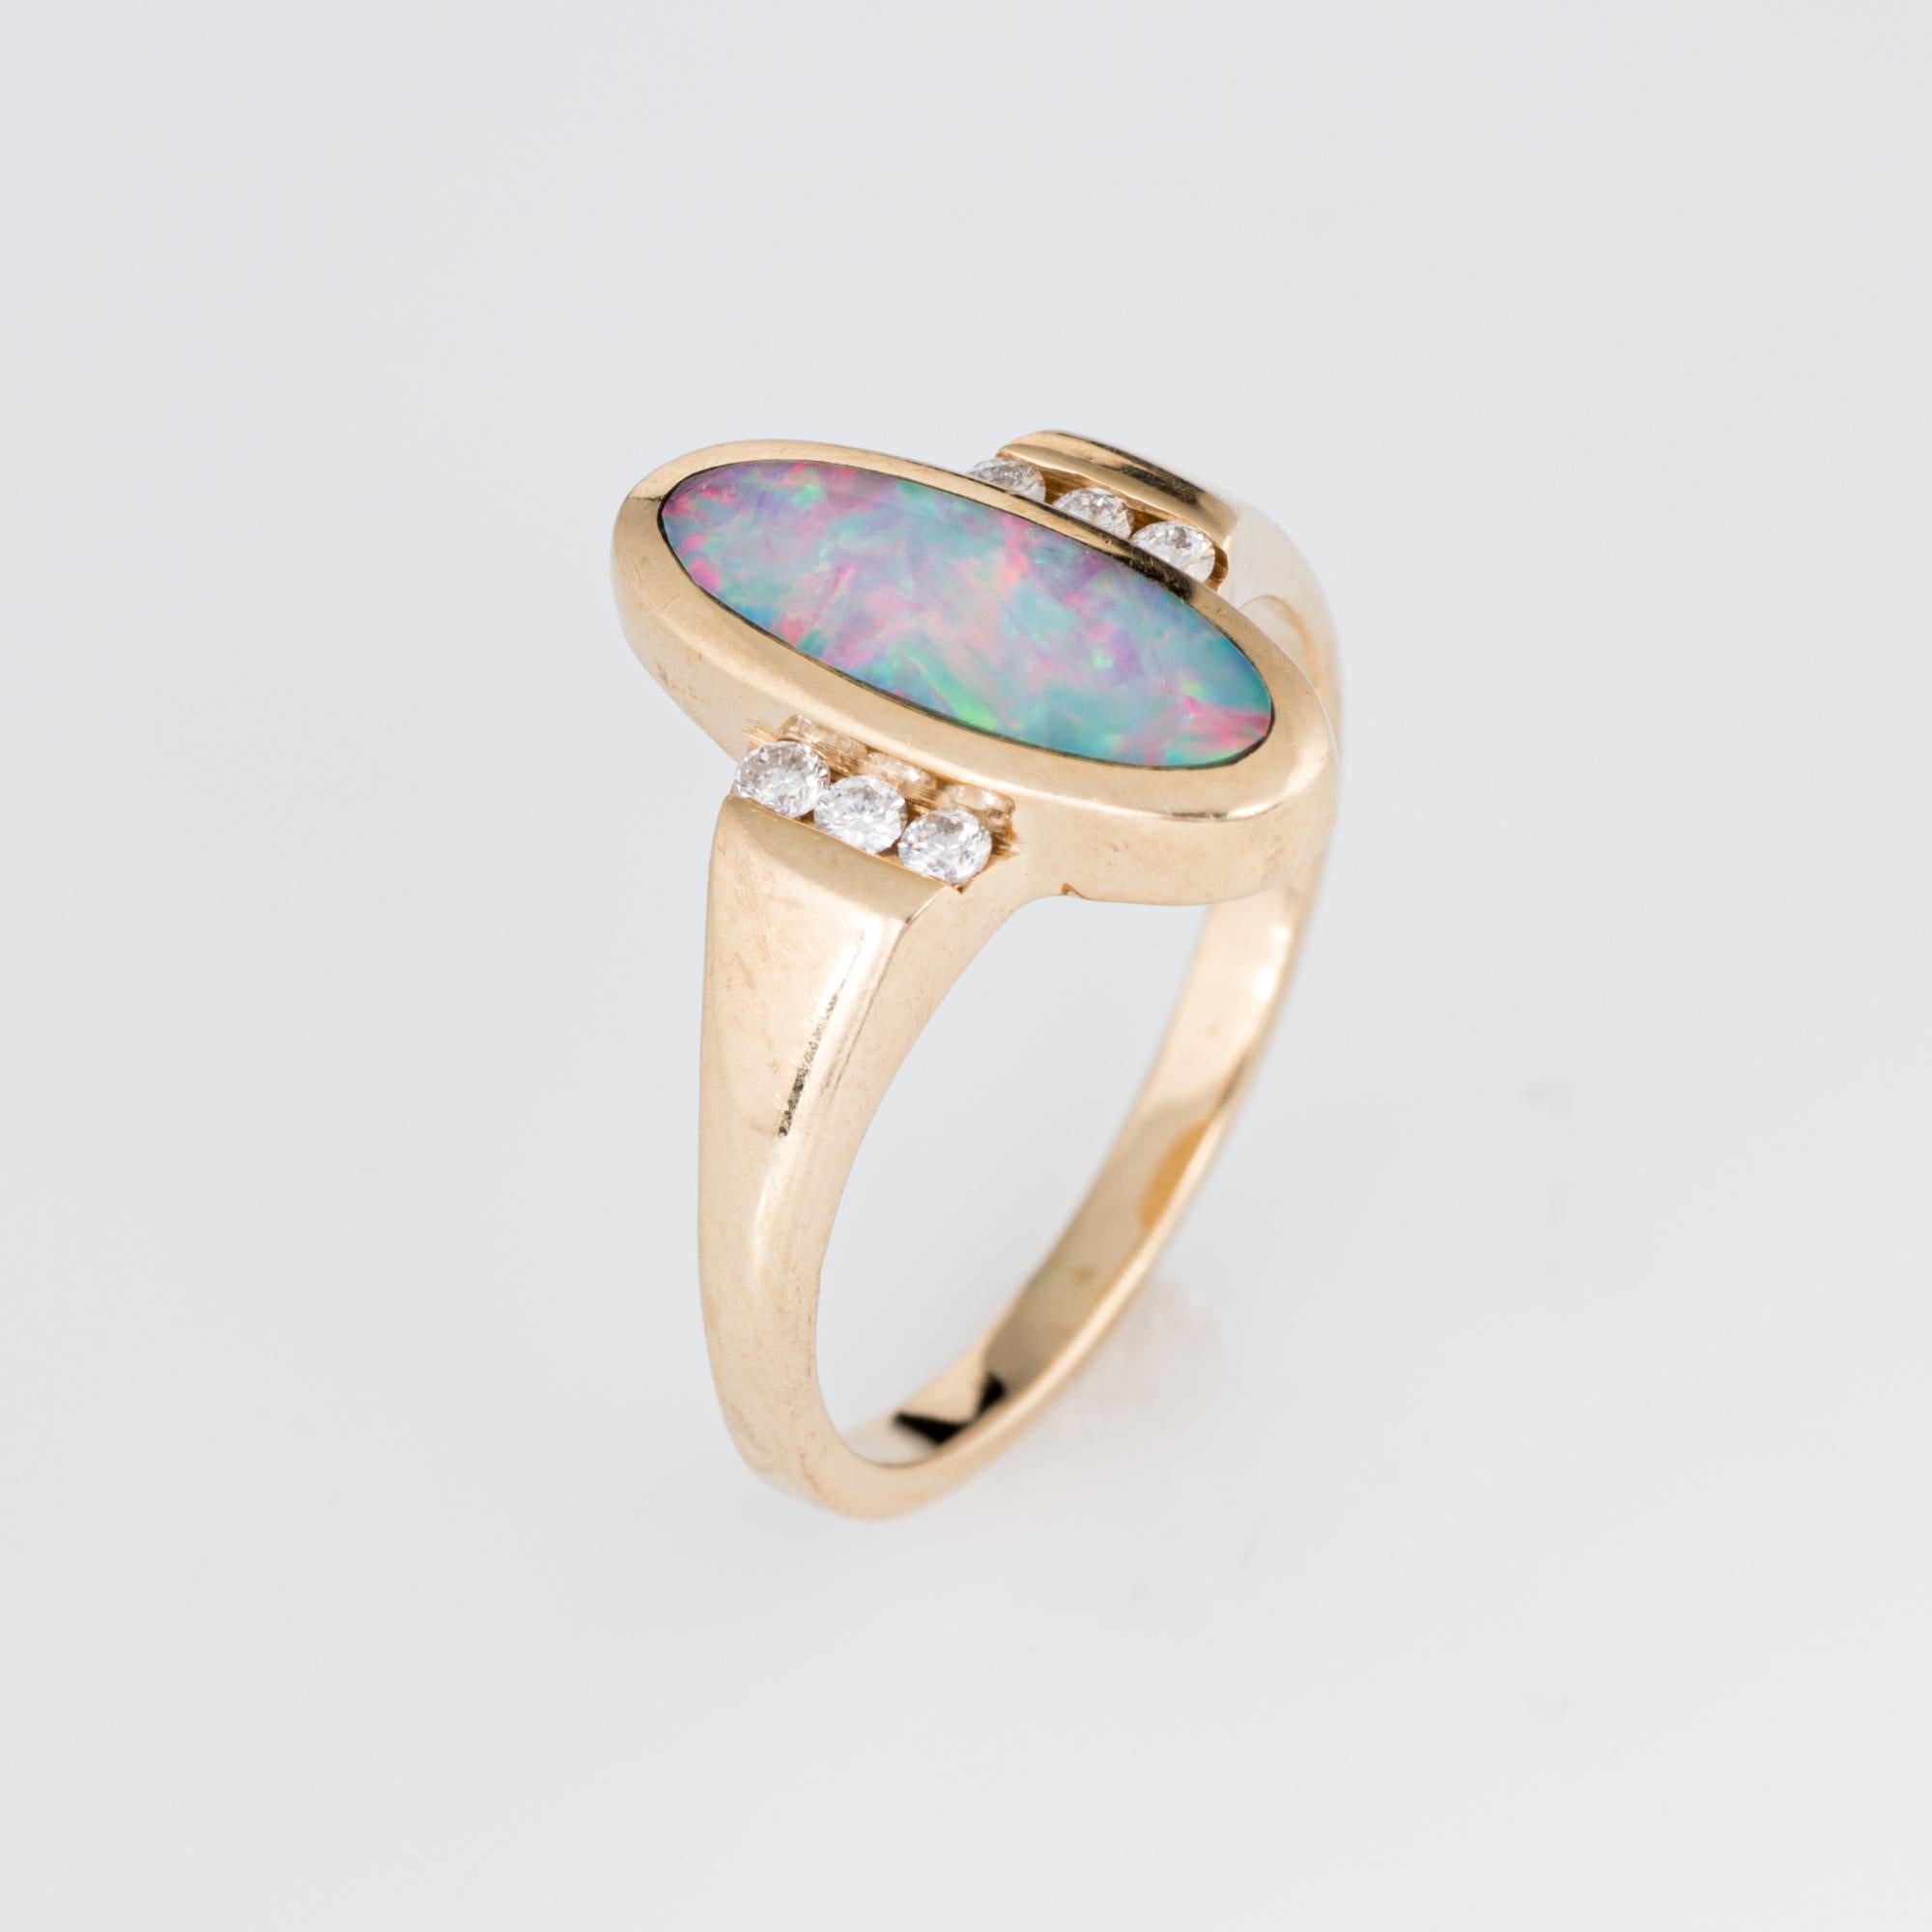 Stylish Kabana opal inlay & diamond ring crafted in 14 karat yellow gold. 

Opal is inlaid into the mount measuring 13mm x 5mm. The diamonds total an estimated 0.06 carats (estimated at G-H color and VS2-SI1 clarity). The opal is in excellent